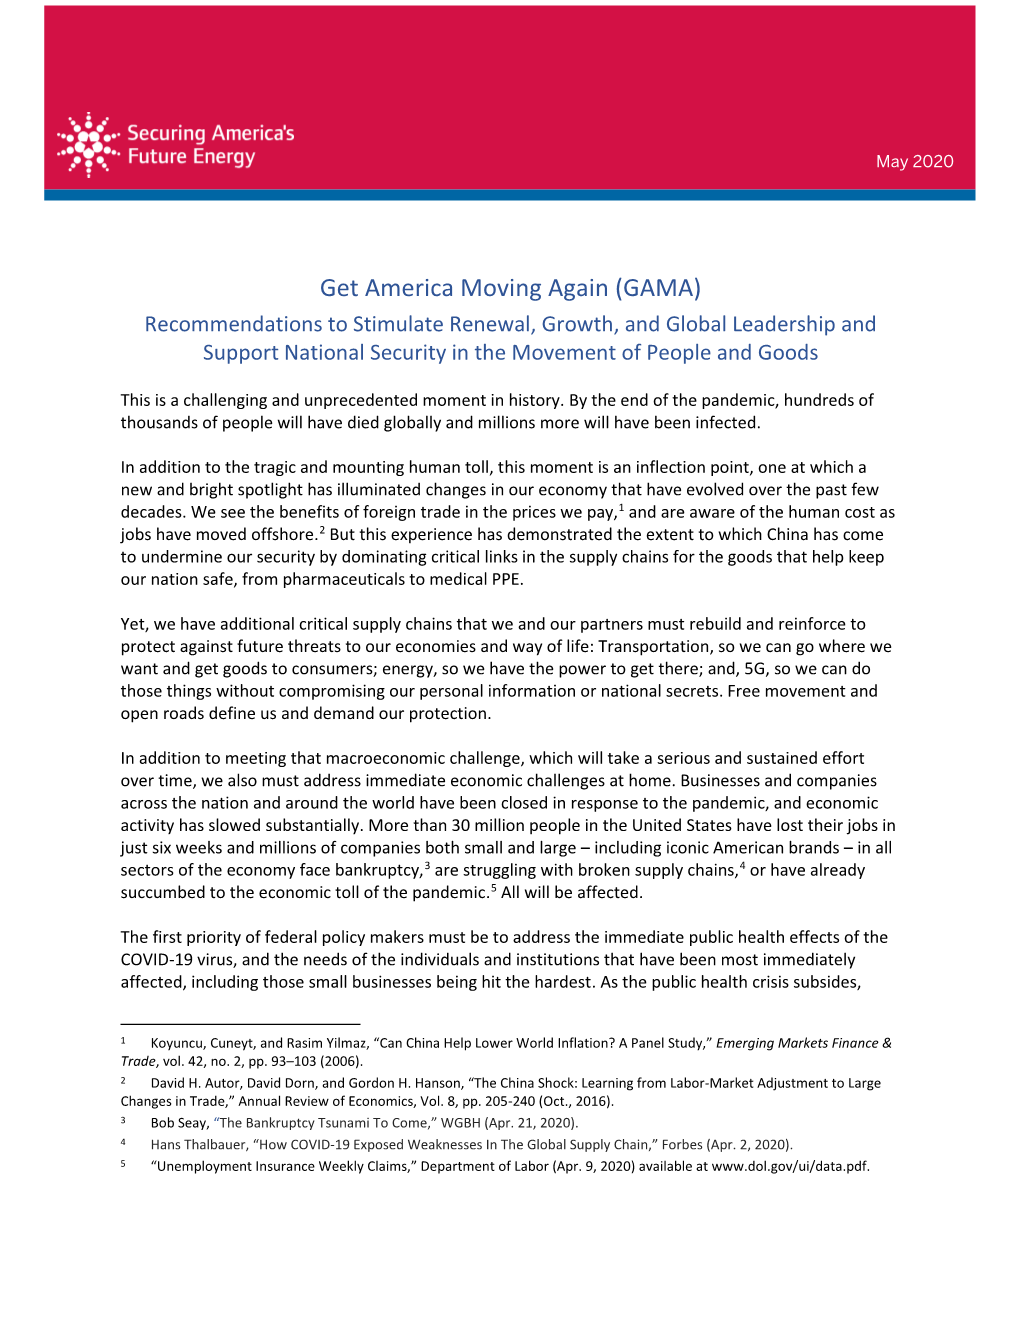 Get America Moving Again (GAMA) Recommendations to Stimulate Renewal, Growth, and Global Leadership and Support National Security in the Movement of People and Goods